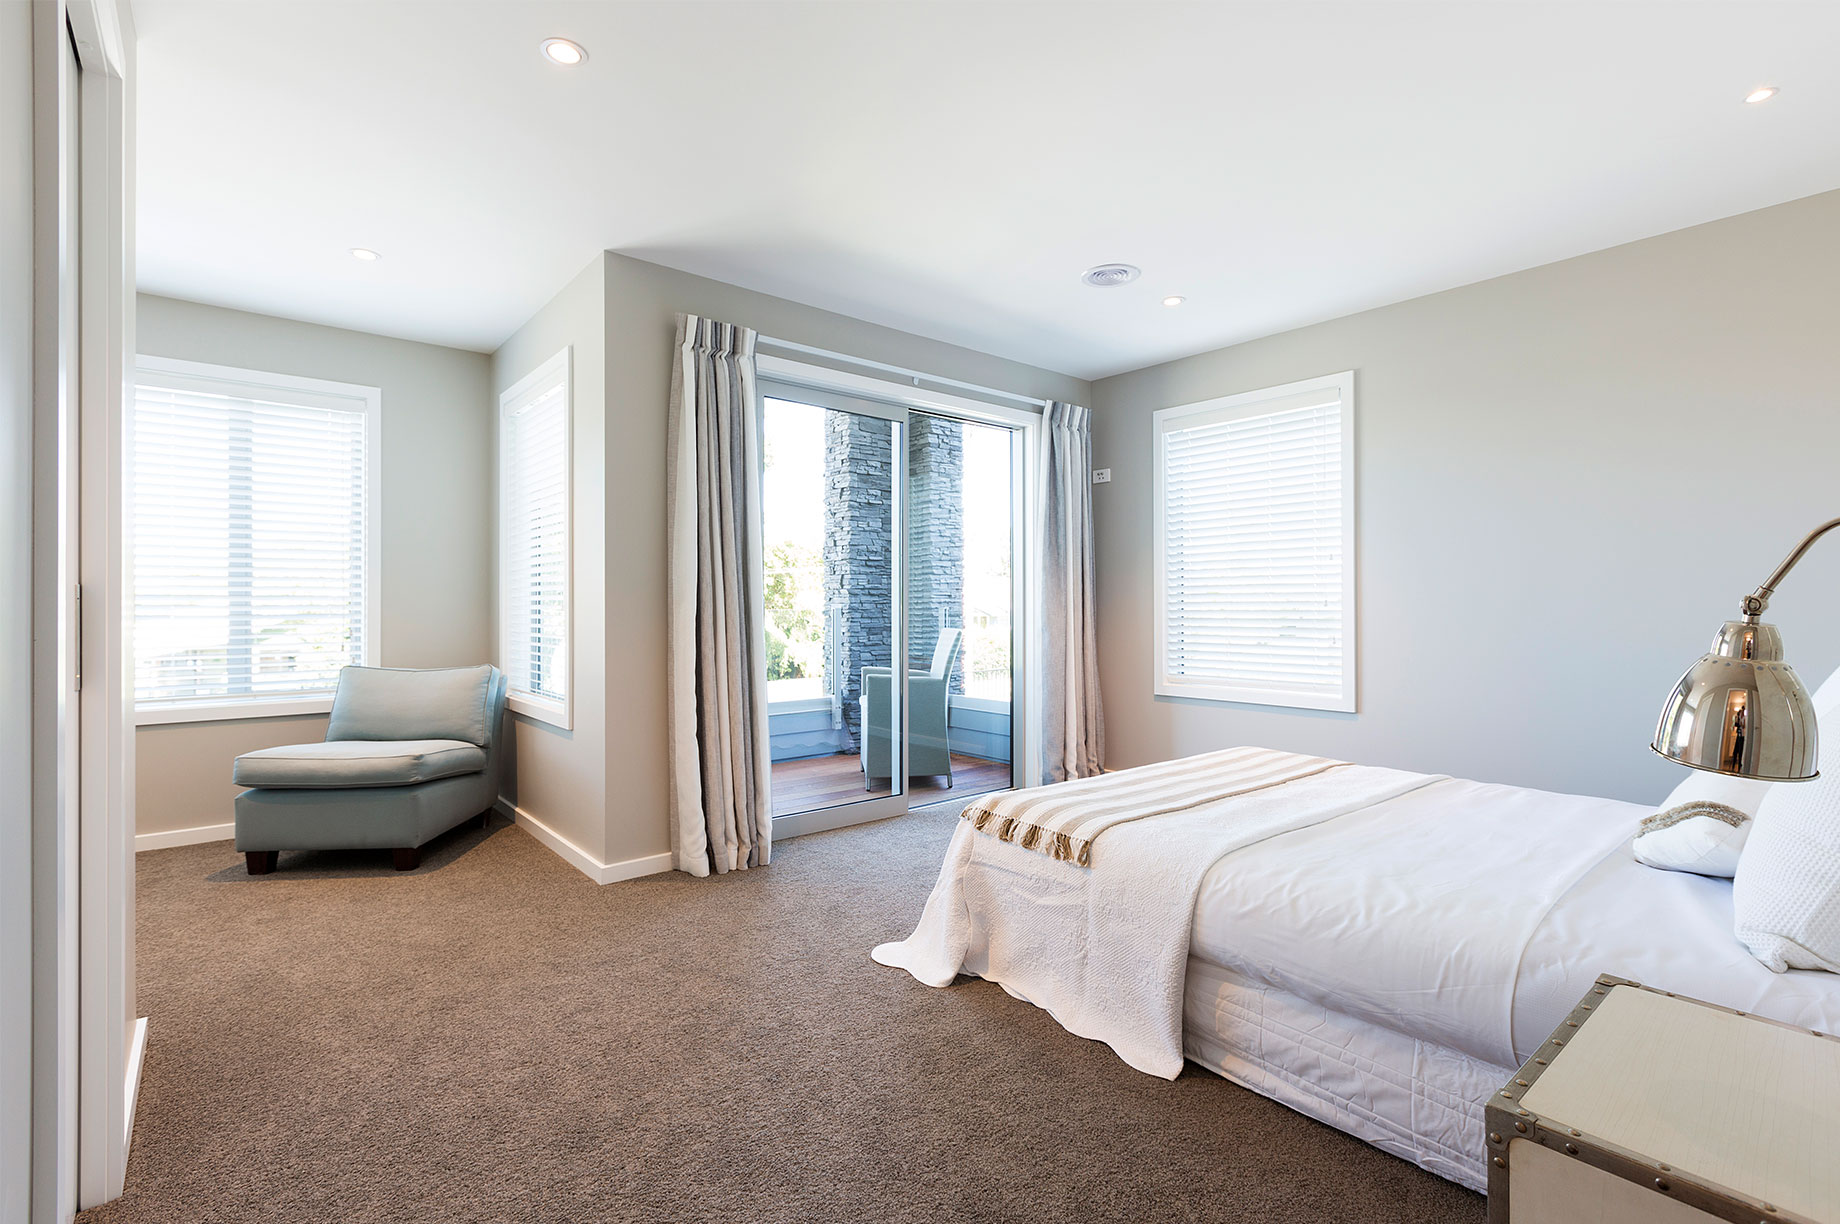 Taupo home bedroom interior with outdoor entrance